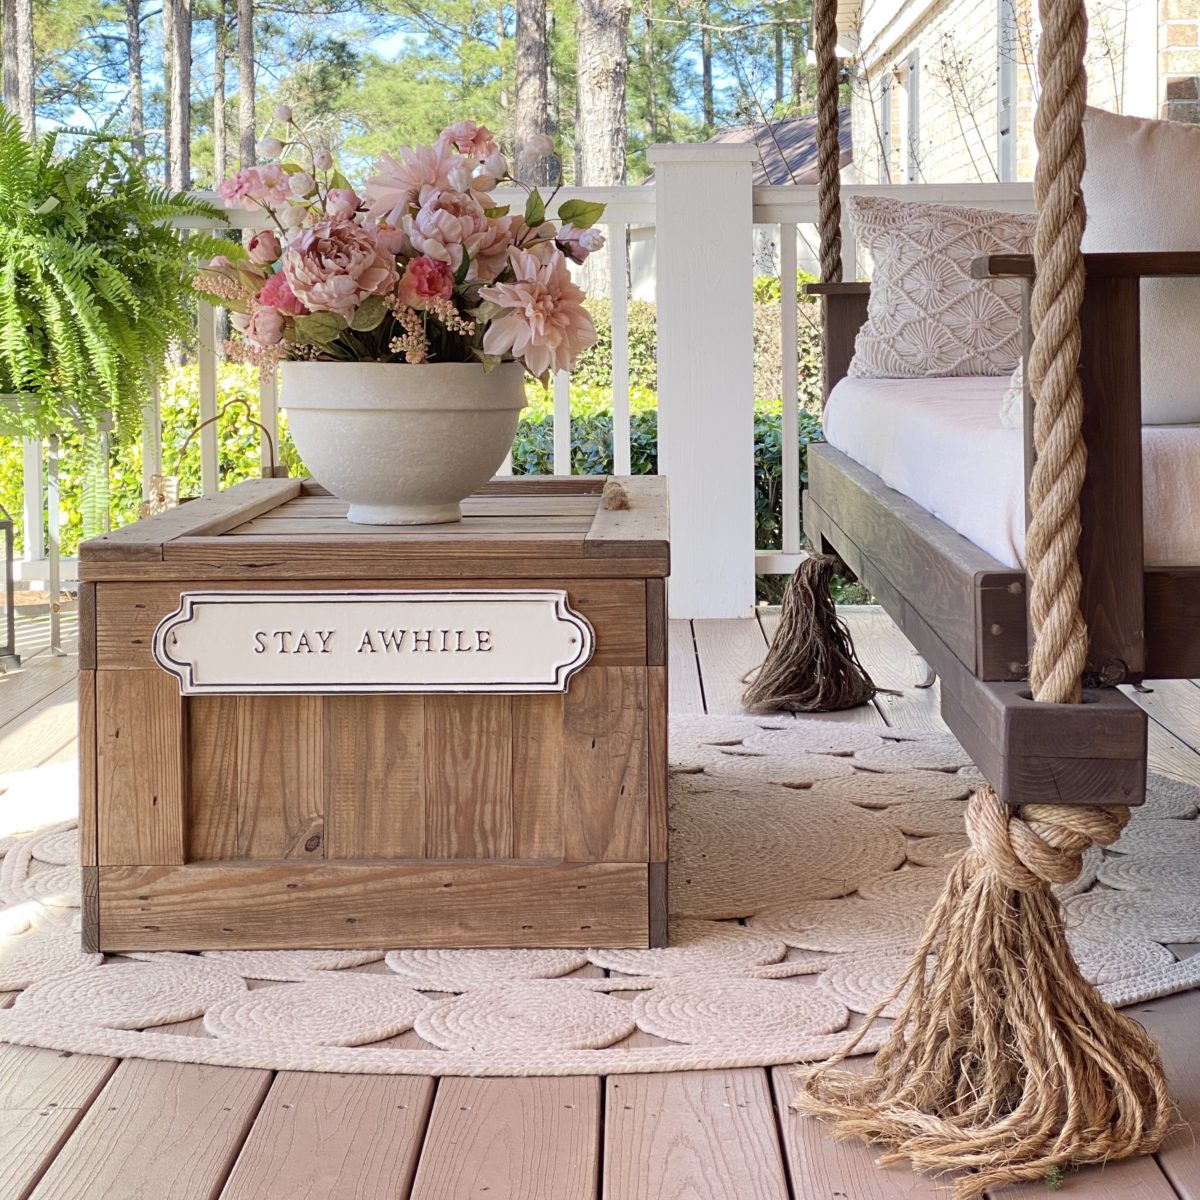 Side view of the porch swing on the front porch with a wood chest in front of it for a coffee table. On the coffee table is a pink floral arrangement.